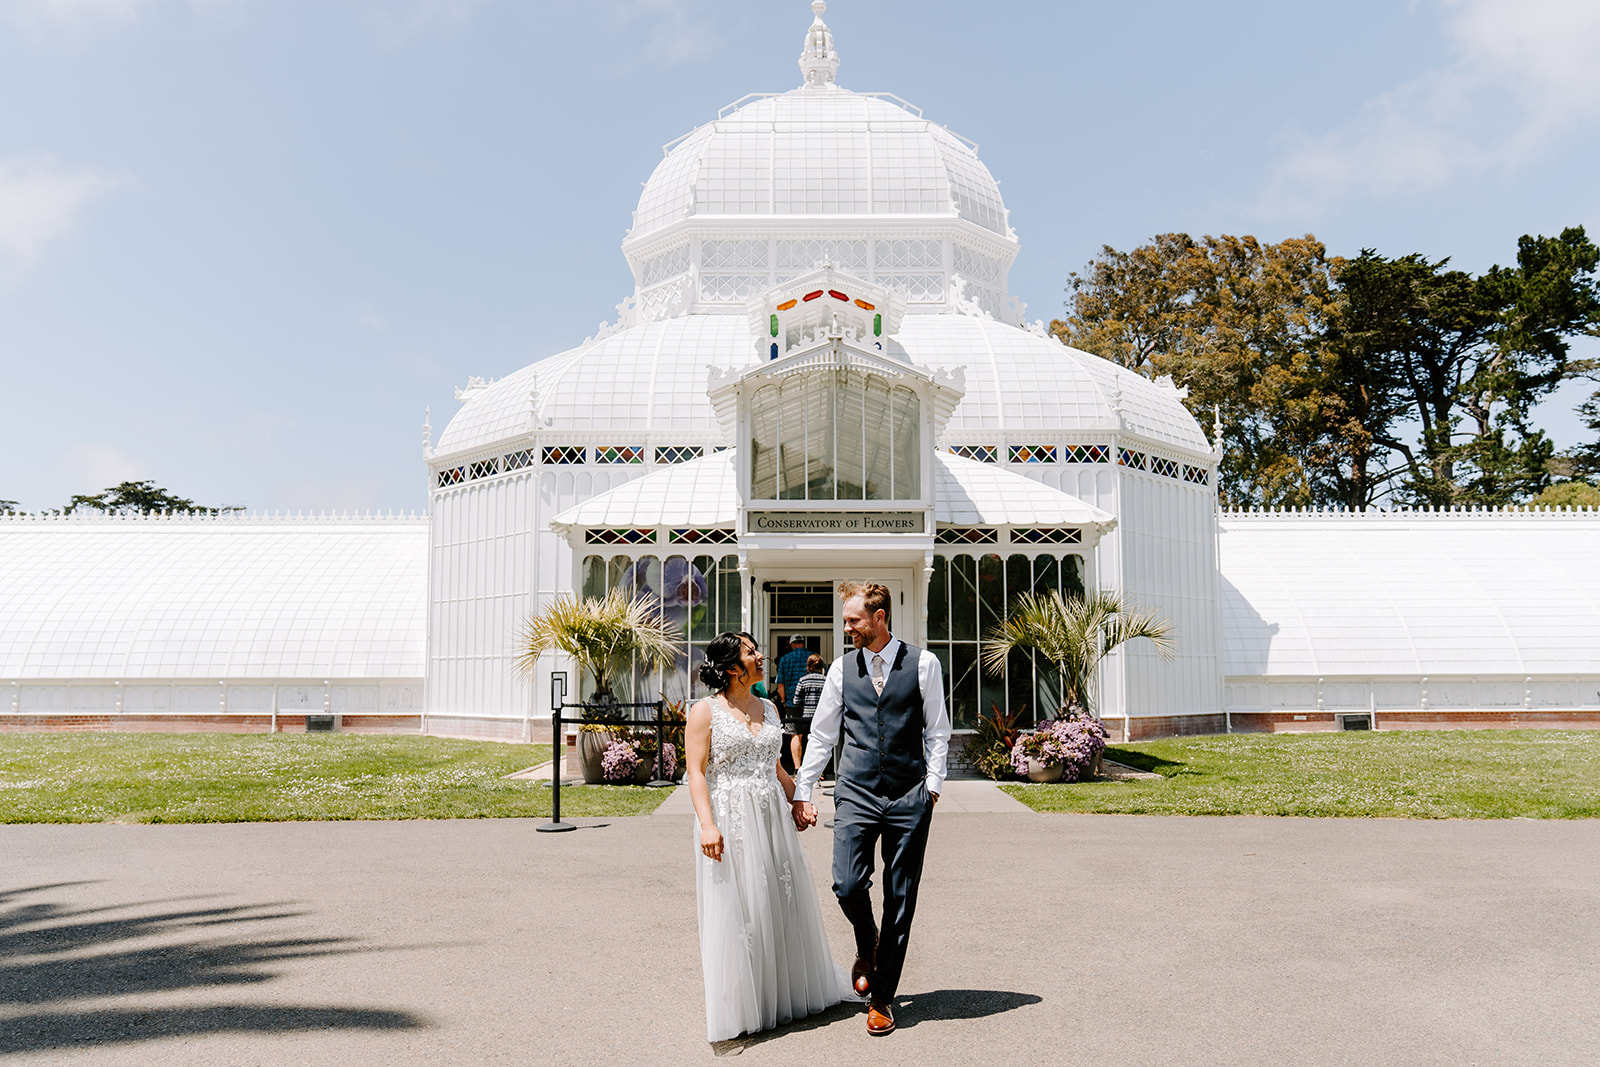 Couple walking from the Conservatory of Flowers during their City Elopement.